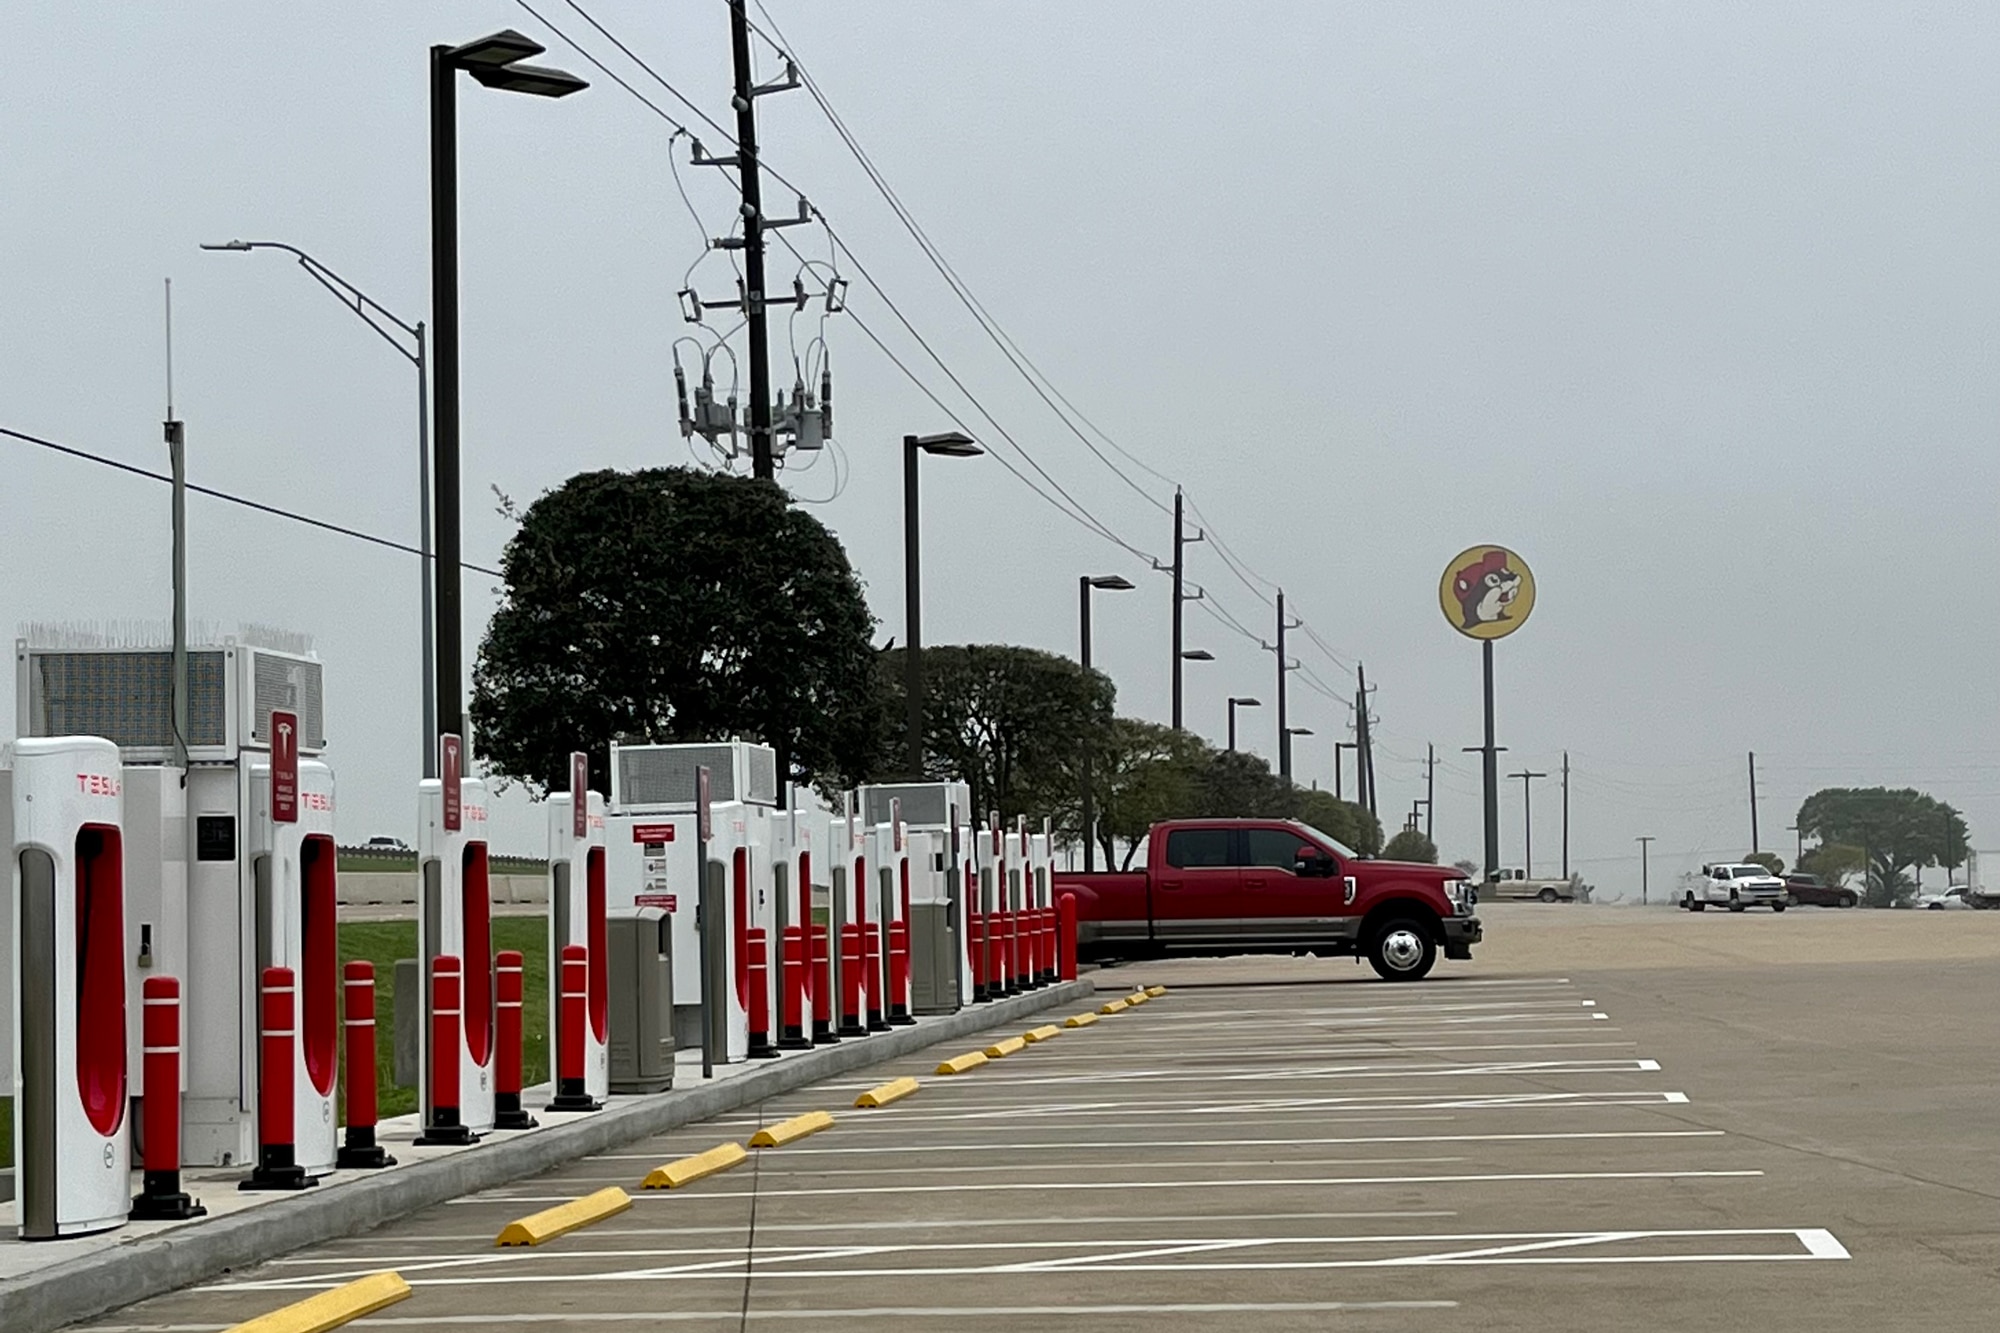 Tesla Superchargers at a Buc-ee's gas station